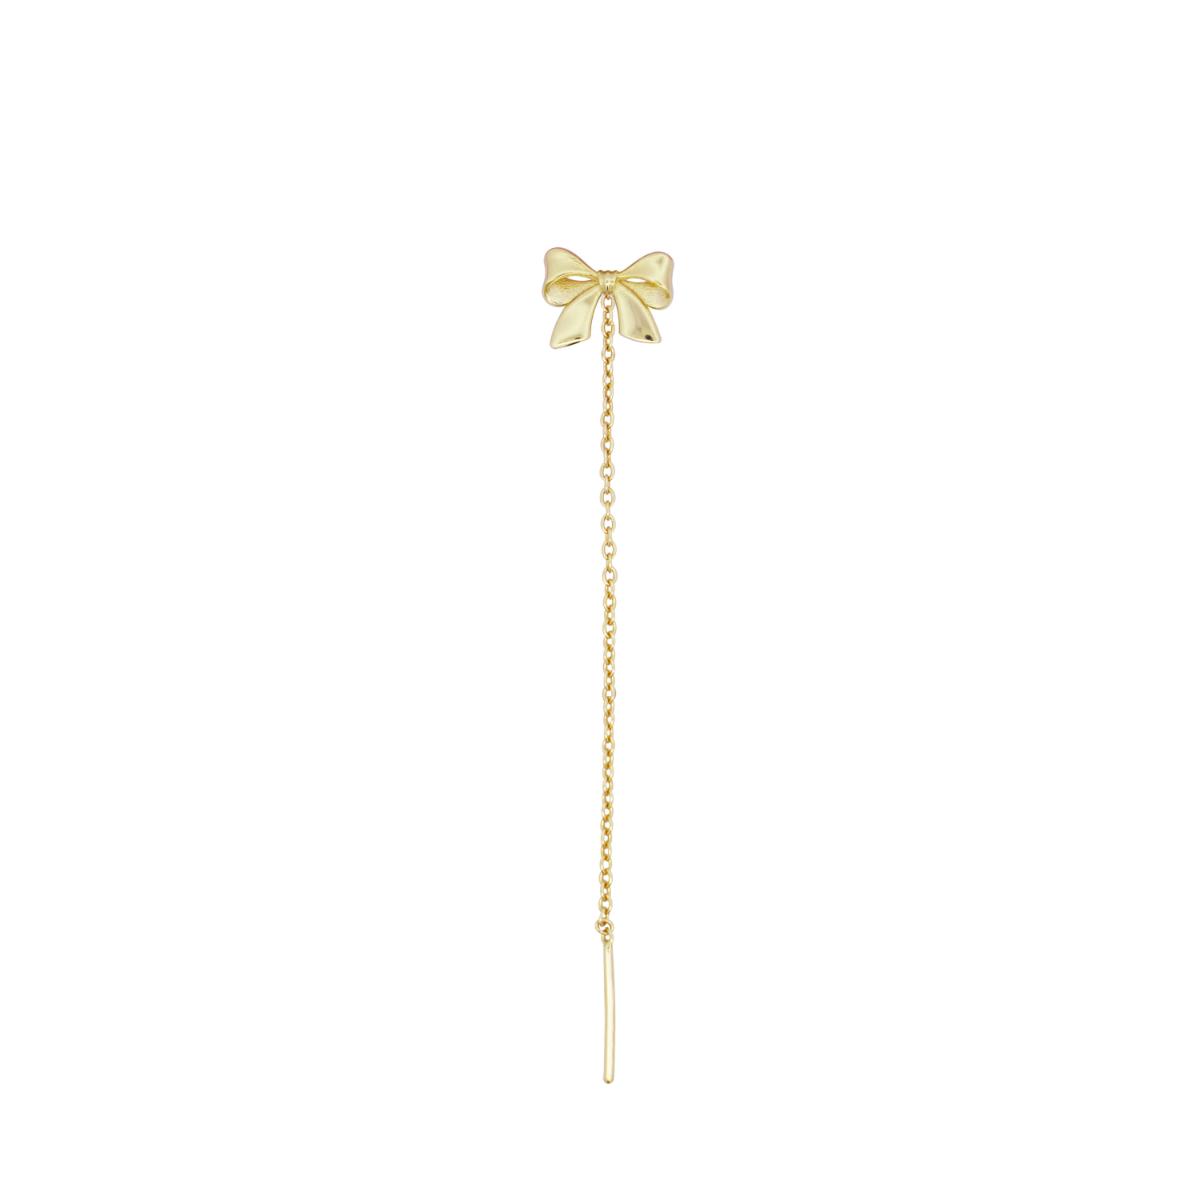 Single earring with dangling chain and simple bow - CANDY BOW